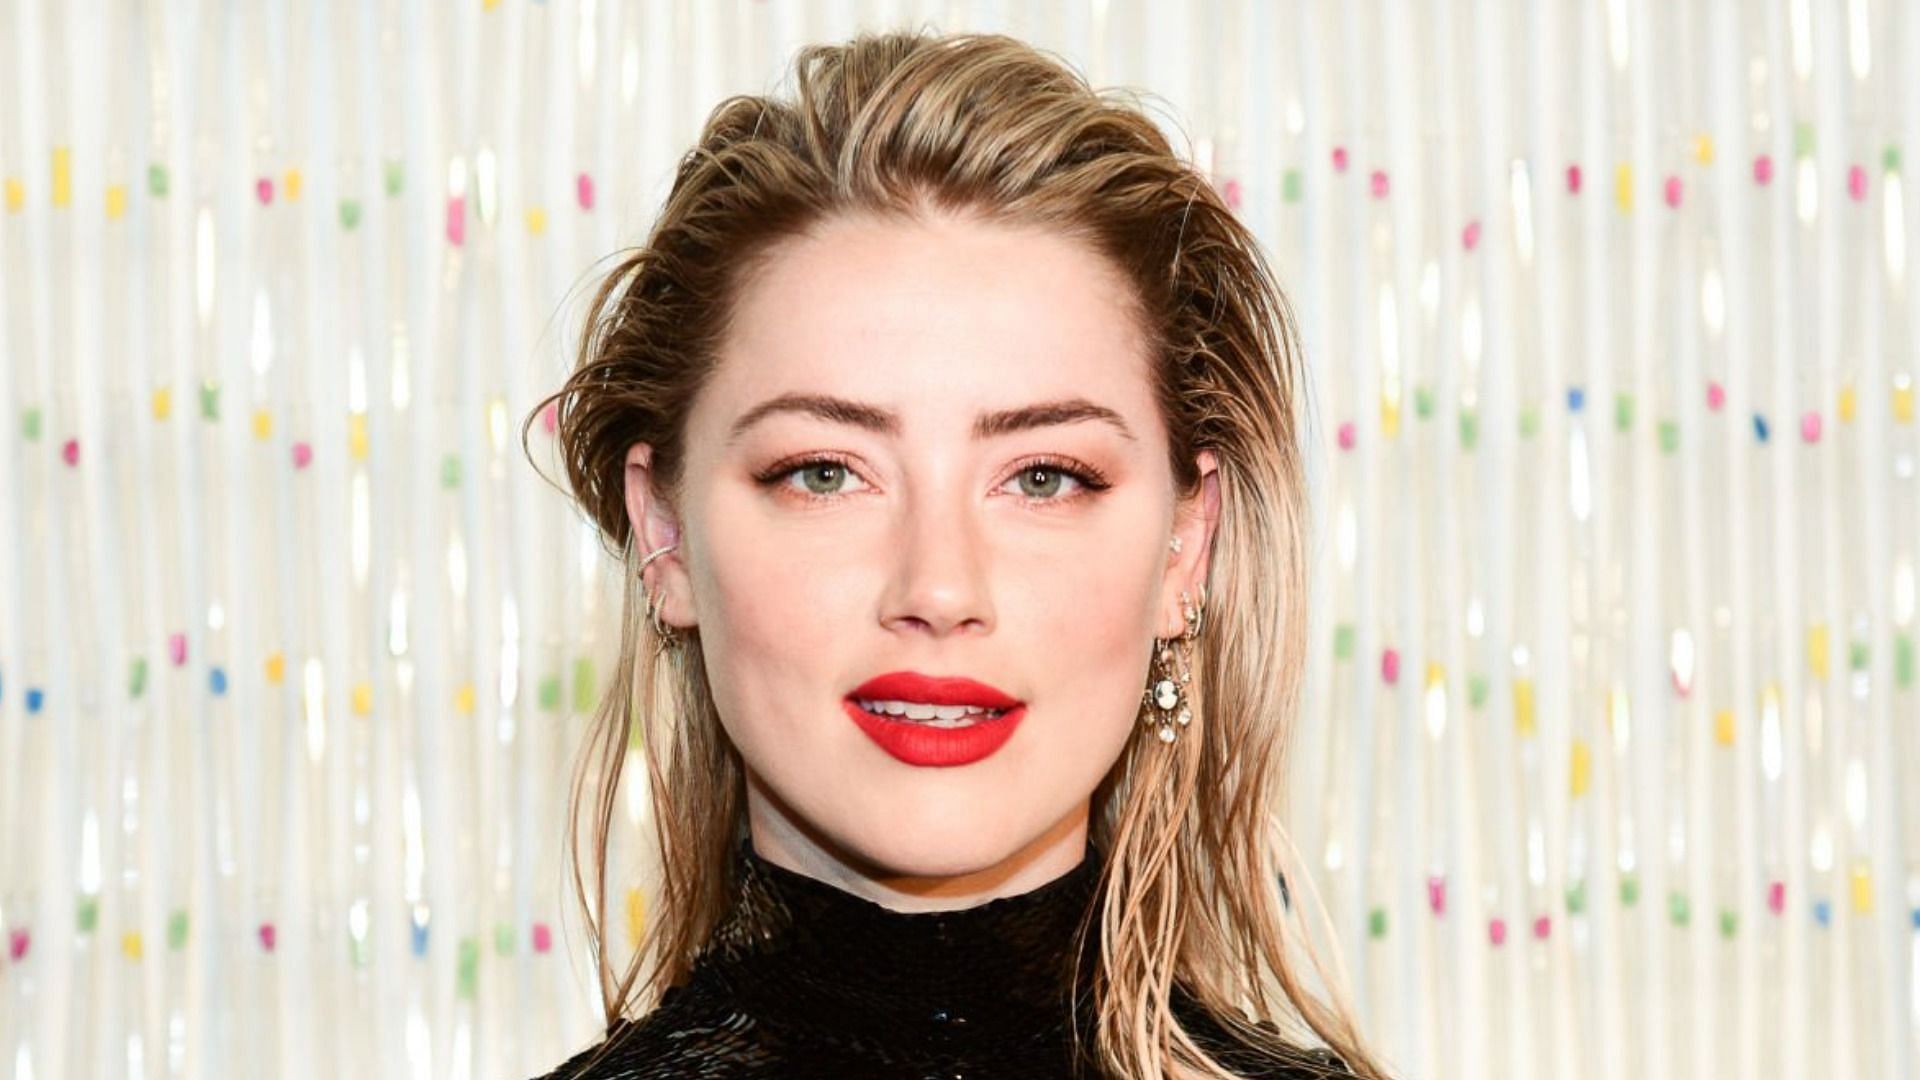 Amber Heard&#039;s apperance in Kenny Chesney&rsquo;s &#039;There Goes My Life&#039; music video recently resurfaced online (Image via Aurora Rose/Getty Images)